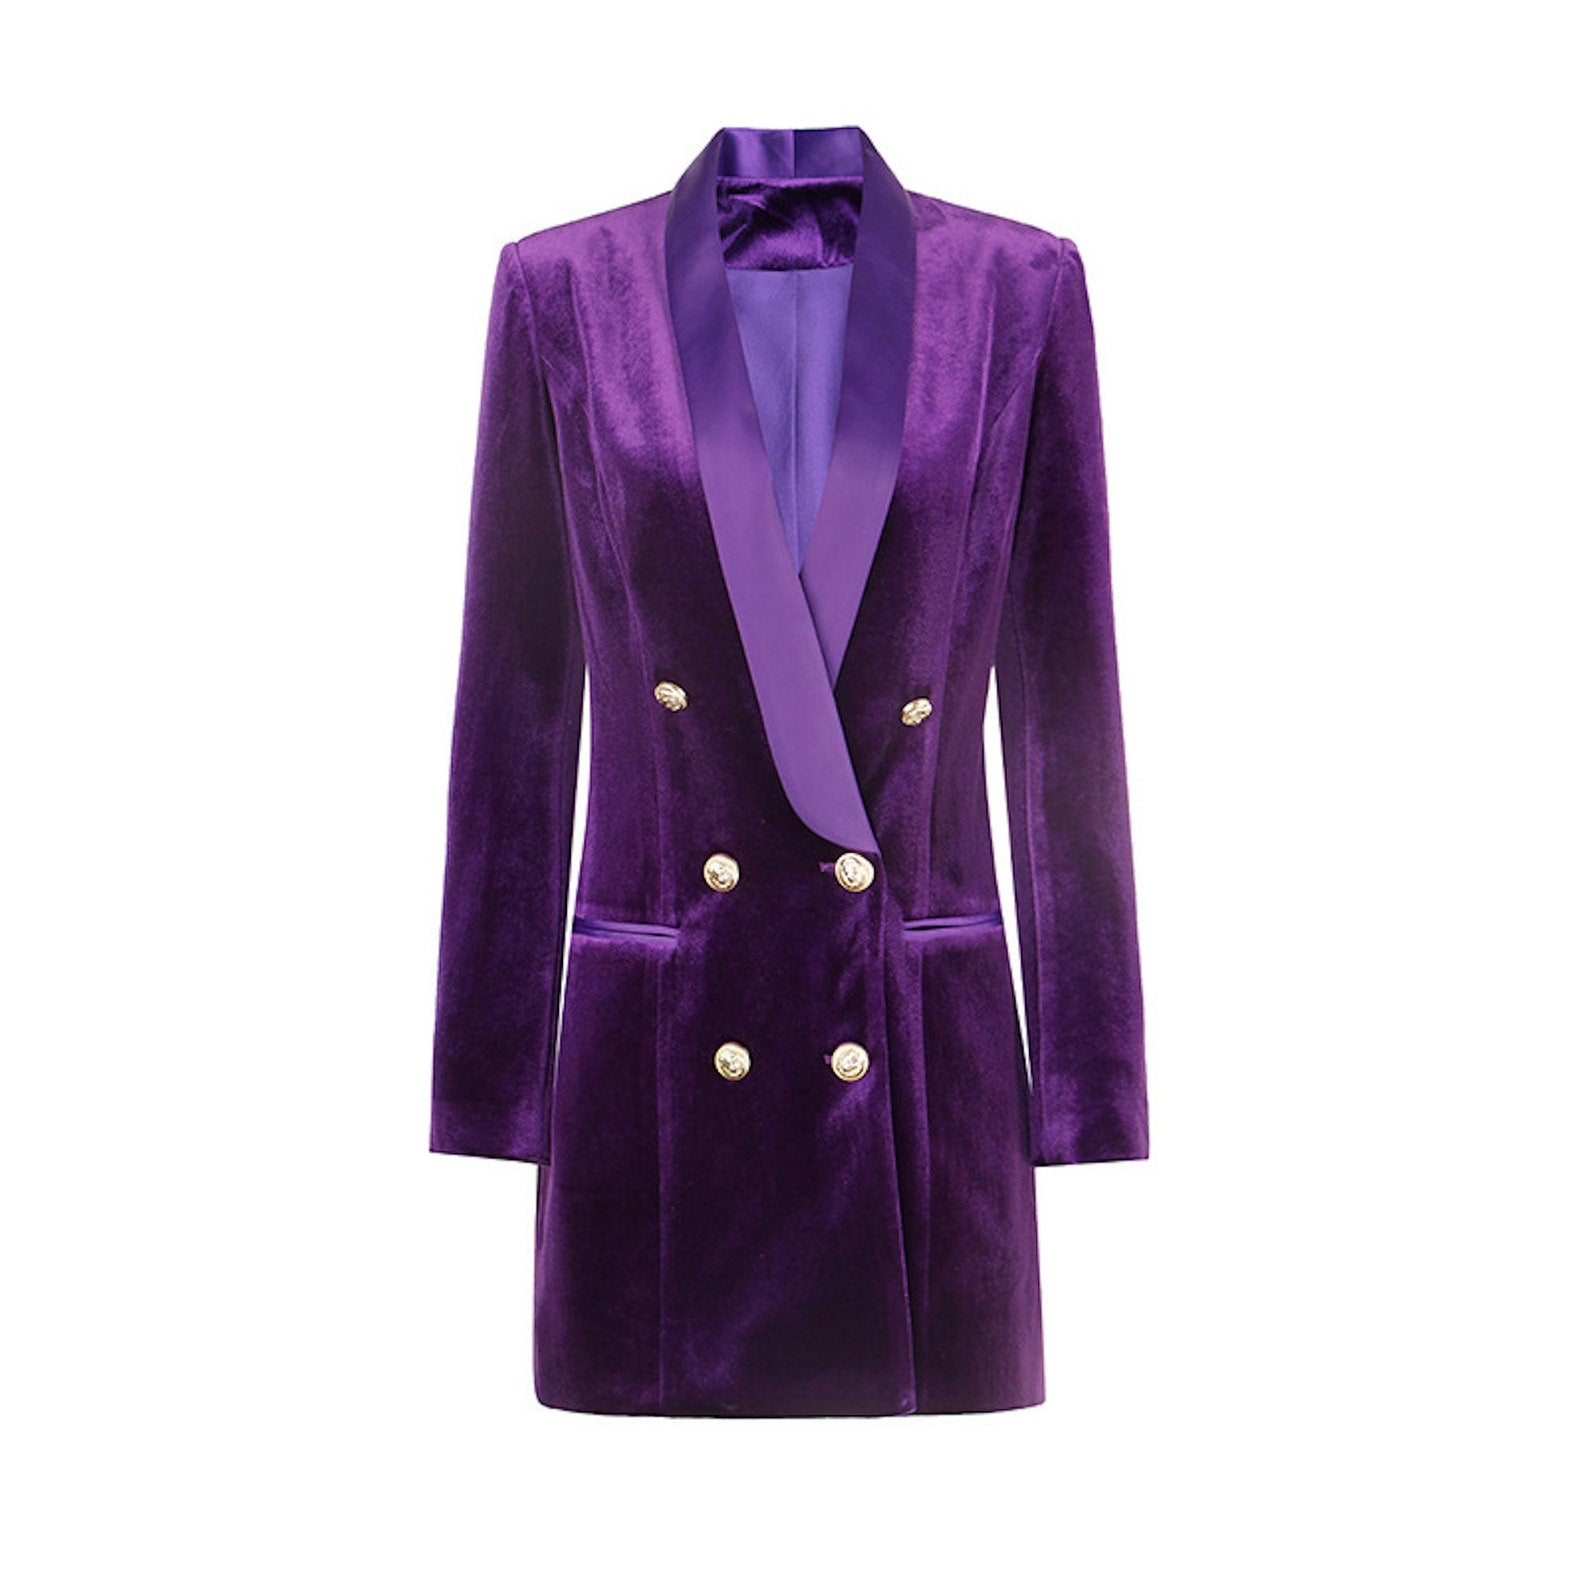 Women's Velvet Purple Blazer Style V Neck Mini Dress  UK CUSTOMER SERVICE! Fashion Pioneer -  Long Purple velvet blazer women's Soft, light and stretchy. This jacket comes with a full lining, soft and comfortable to Wear. Velvet Fabric, Double Breasted, Regular Fit, Shawl Collar, Long Sleeves, Buttons Decor at Cuffs, Casual Smart Blazer .Soft fabric and lining ensure all-day comfort, while the minimalist design makes it perfect for a work-wear day-to-night look.